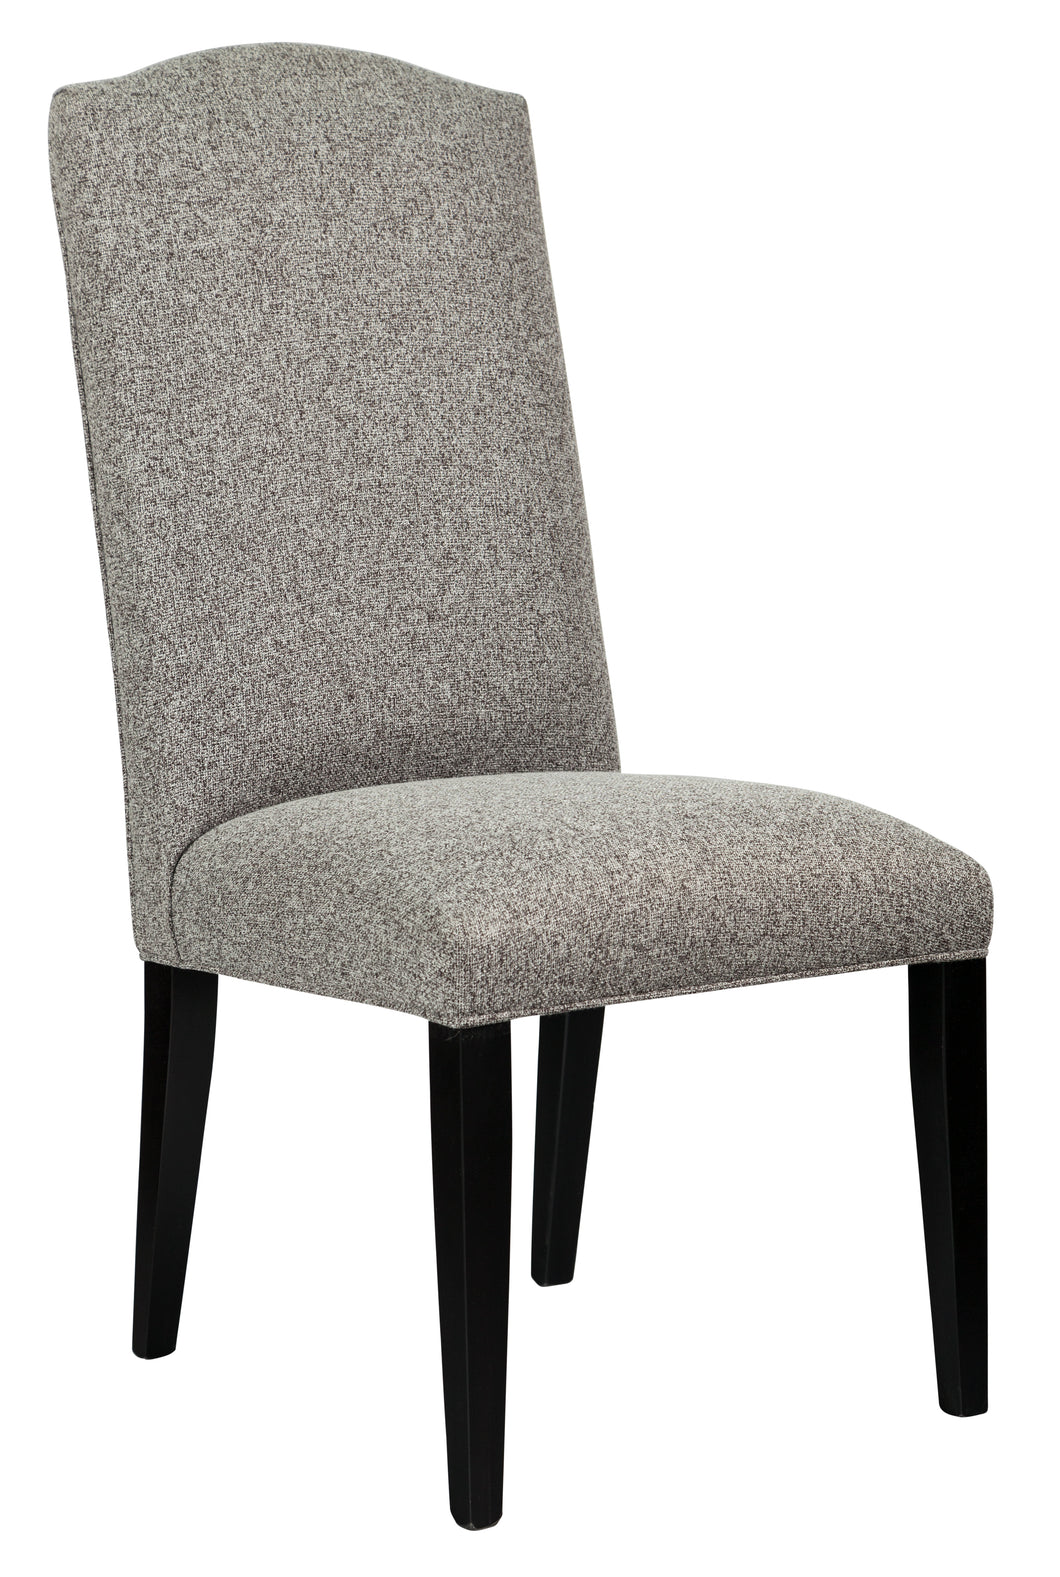 Mennonite Handcrafted Upholstered Dining Chair